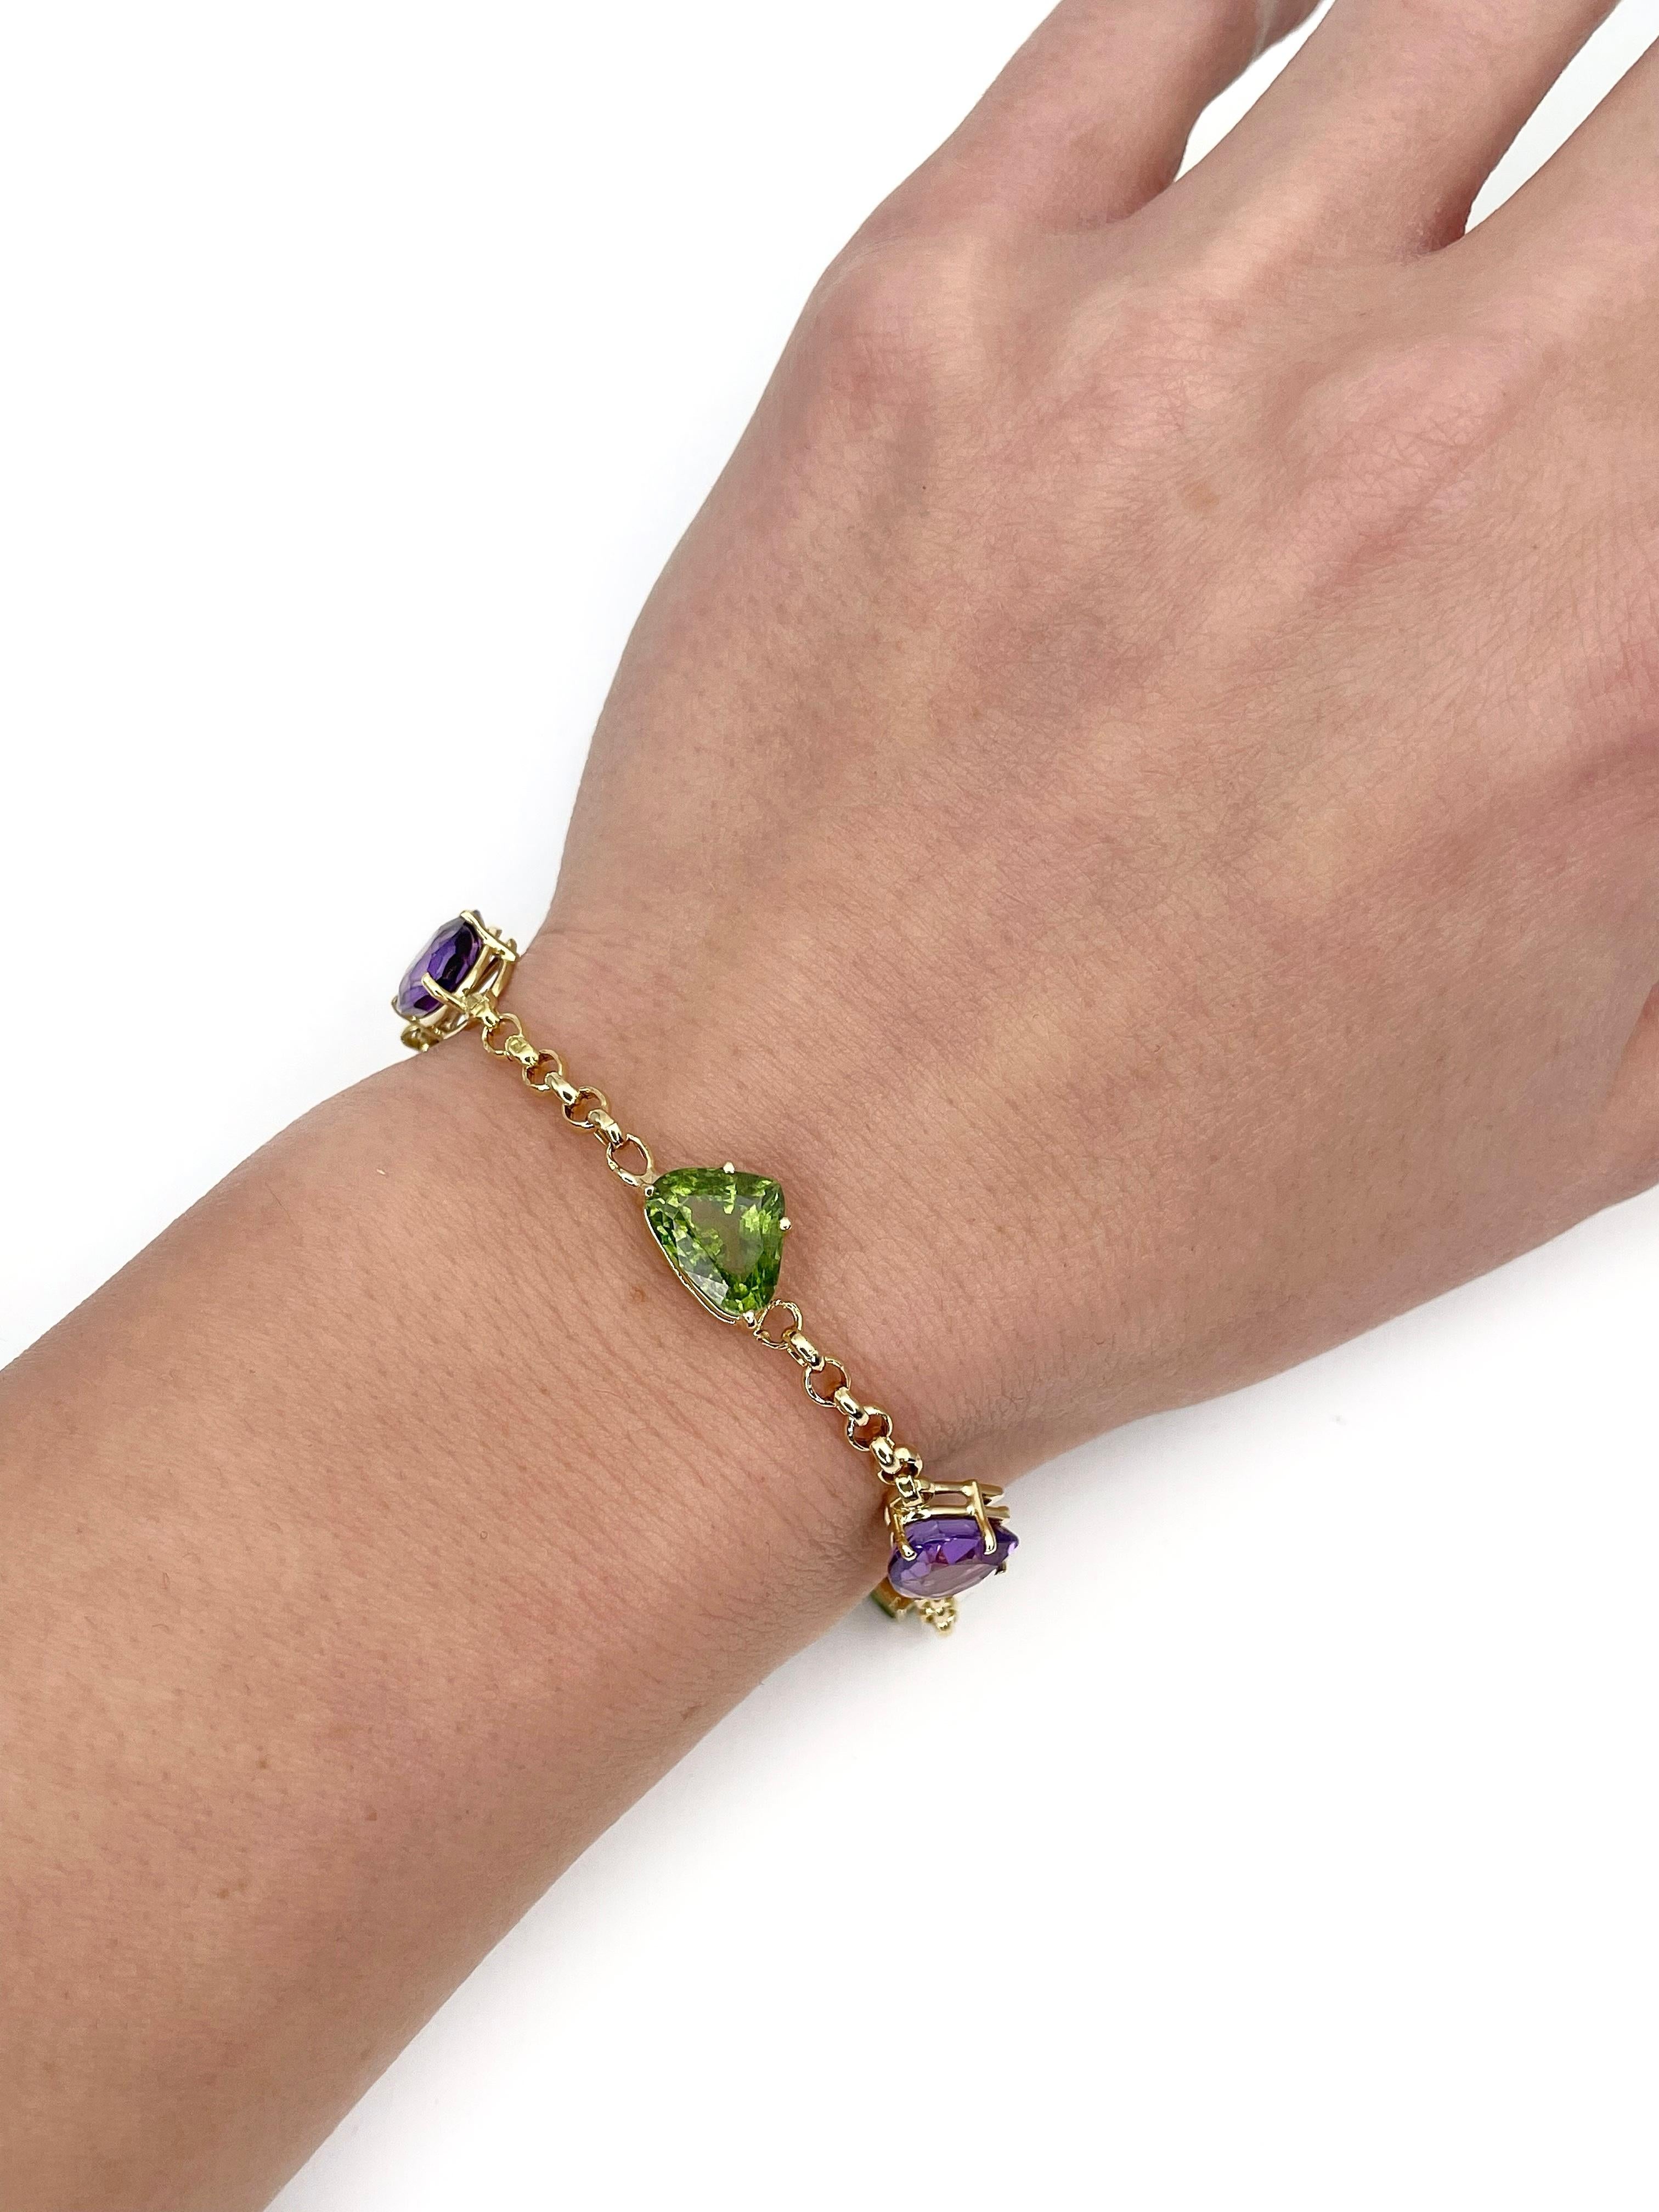 This is a modern design chain bracelet crafted in 18K yellow gold. Circa 1980. 
The piece features: 3 peridots (TW ~7ct) and 2 amethysts (TW ~6ct).

Weight: 9.14g
Length: 18cm

———

If you have any questions, please feel free to ask. We describe our